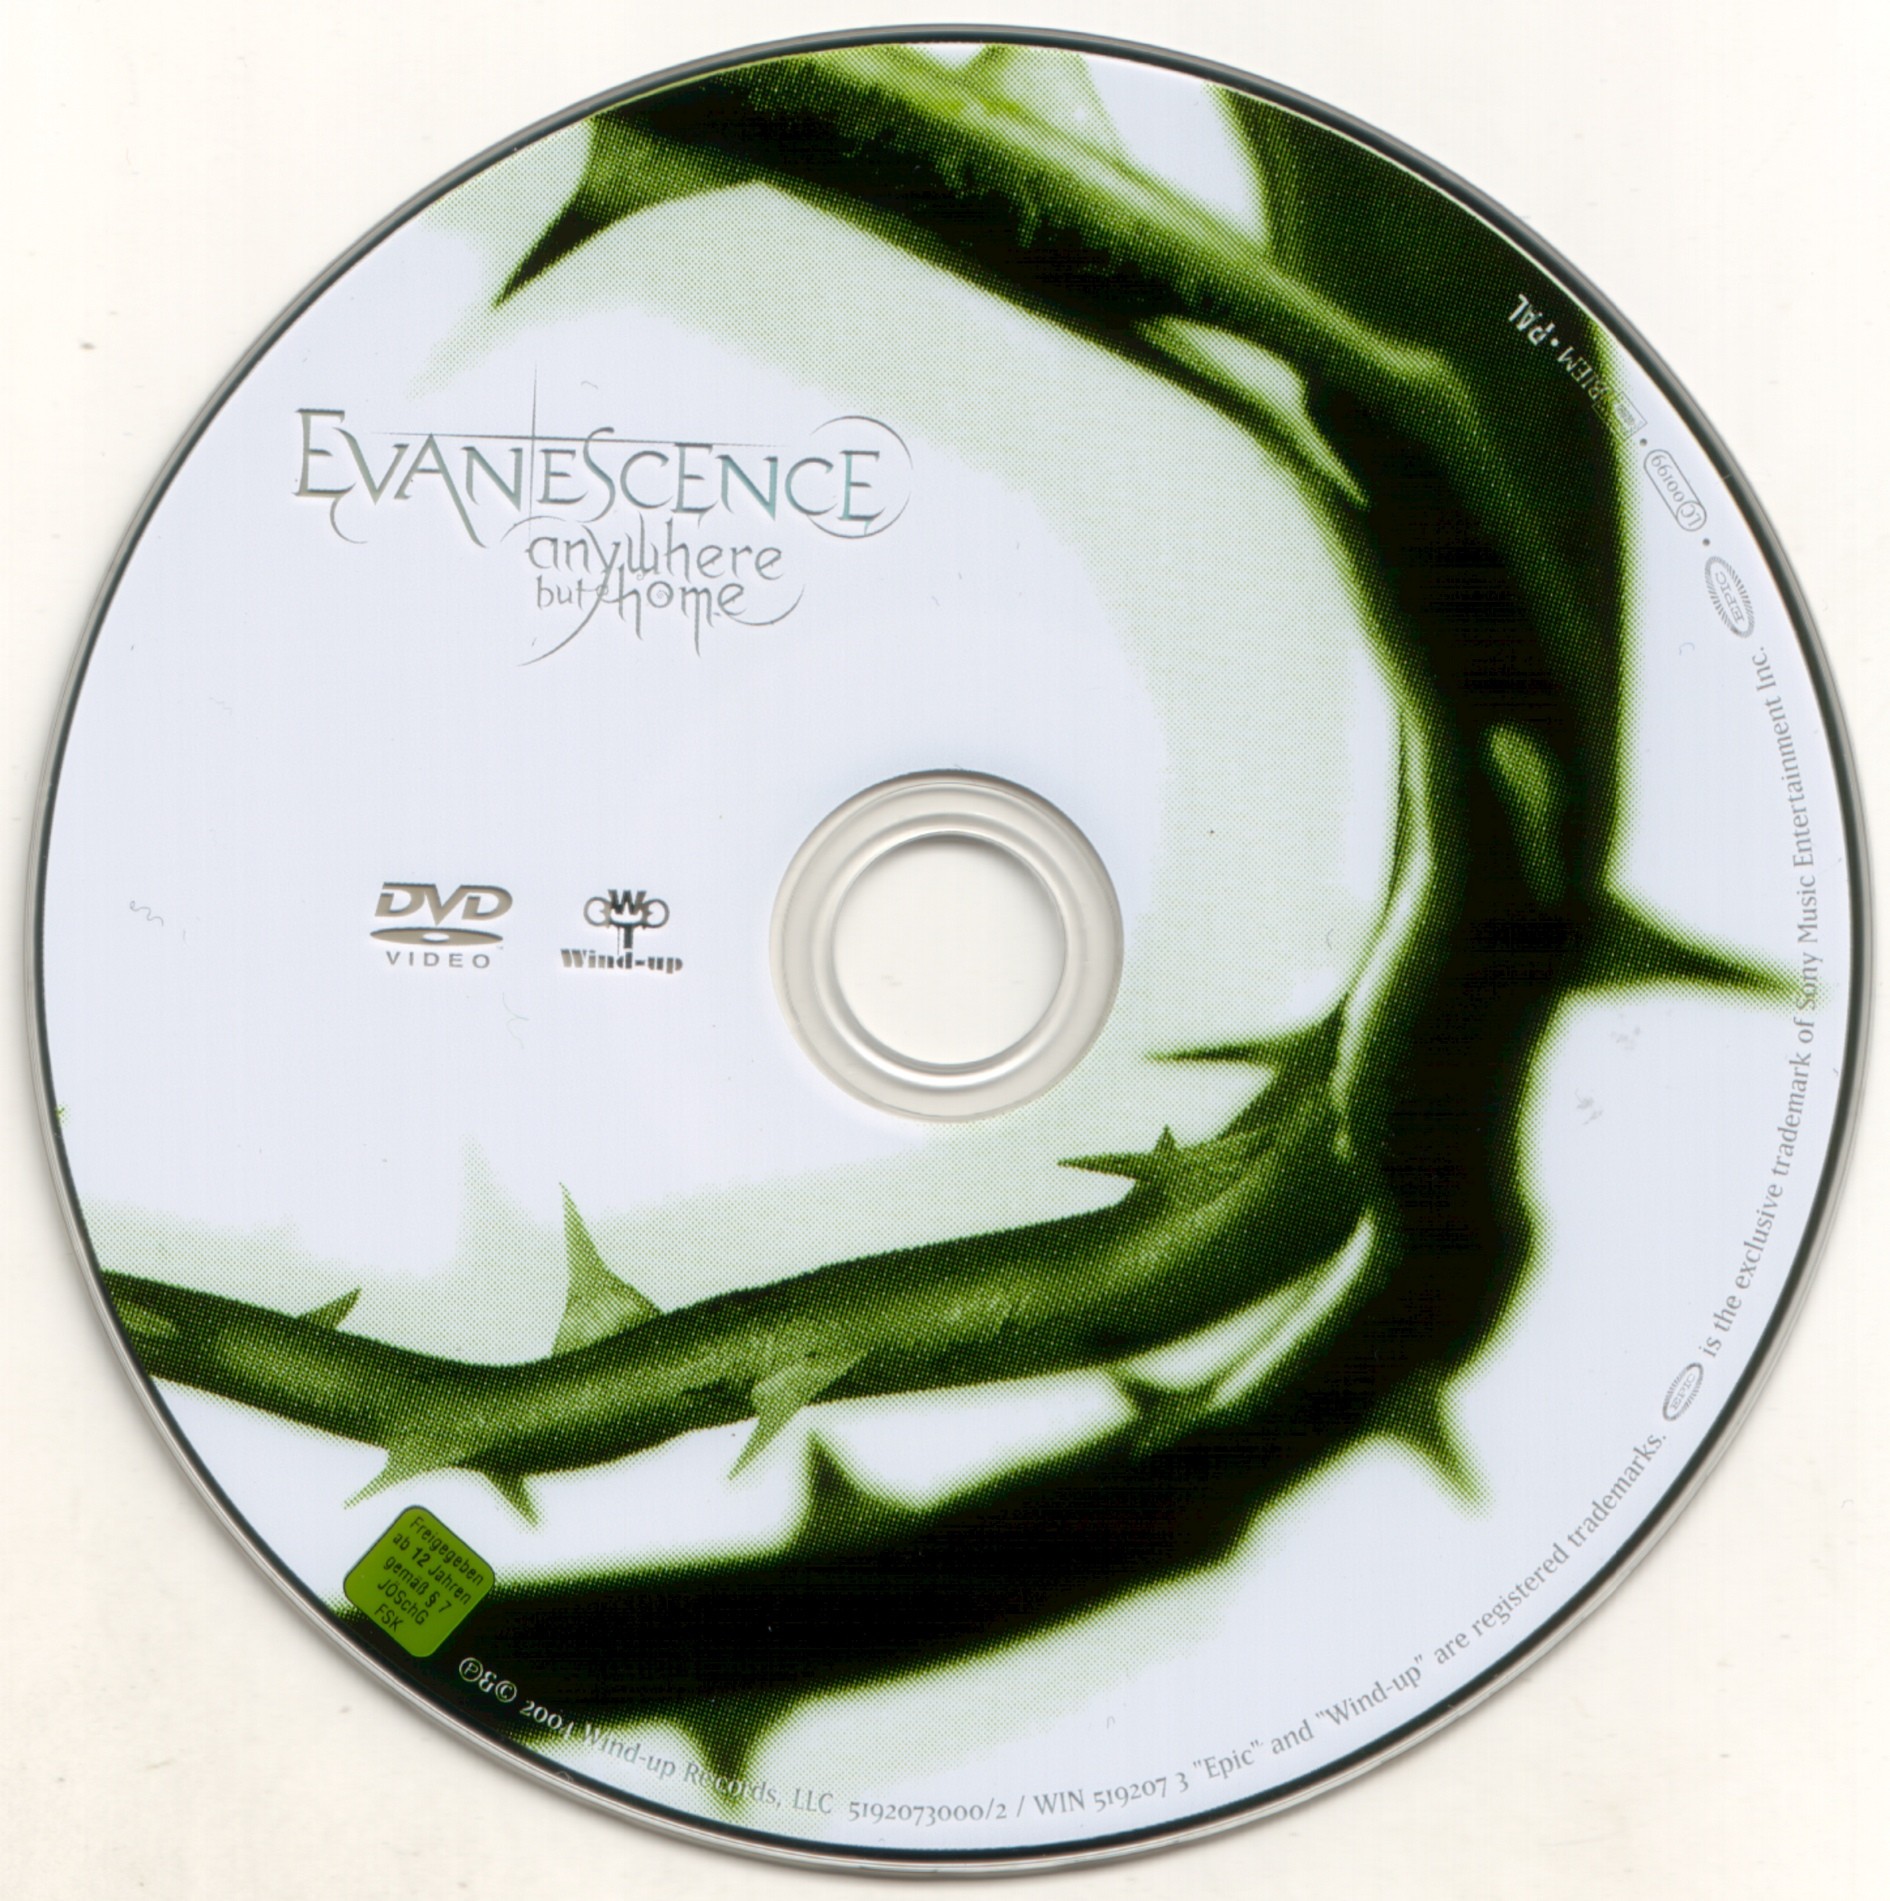 Evanescence anywhere but home